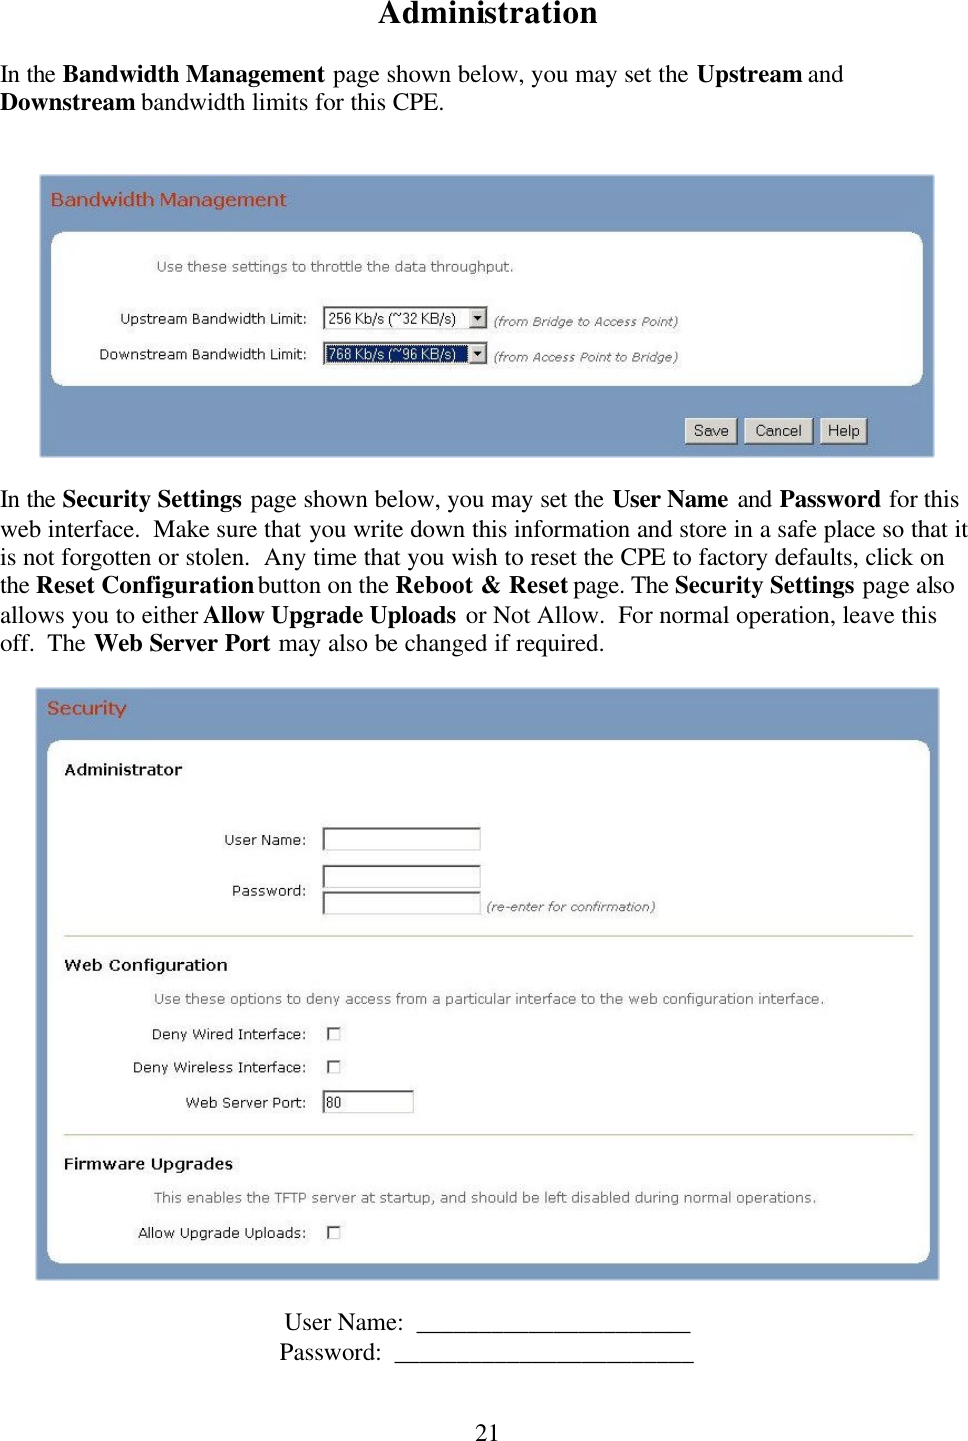  21Administration  In the Bandwidth Management page shown below, you may set the Upstream and Downstream bandwidth limits for this CPE.       In the Security Settings page shown below, you may set the User Name and Password for this web interface.  Make sure that you write down this information and store in a safe place so that it is not forgotten or stolen.  Any time that you wish to reset the CPE to factory defaults, click on the Reset Configuration button on the Reboot &amp; Reset page. The Security Settings page also allows you to either Allow Upgrade Uploads or Not Allow.  For normal operation, leave this off.  The Web Server Port may also be changed if required.    User Name:  ______________________ Password:  ________________________  